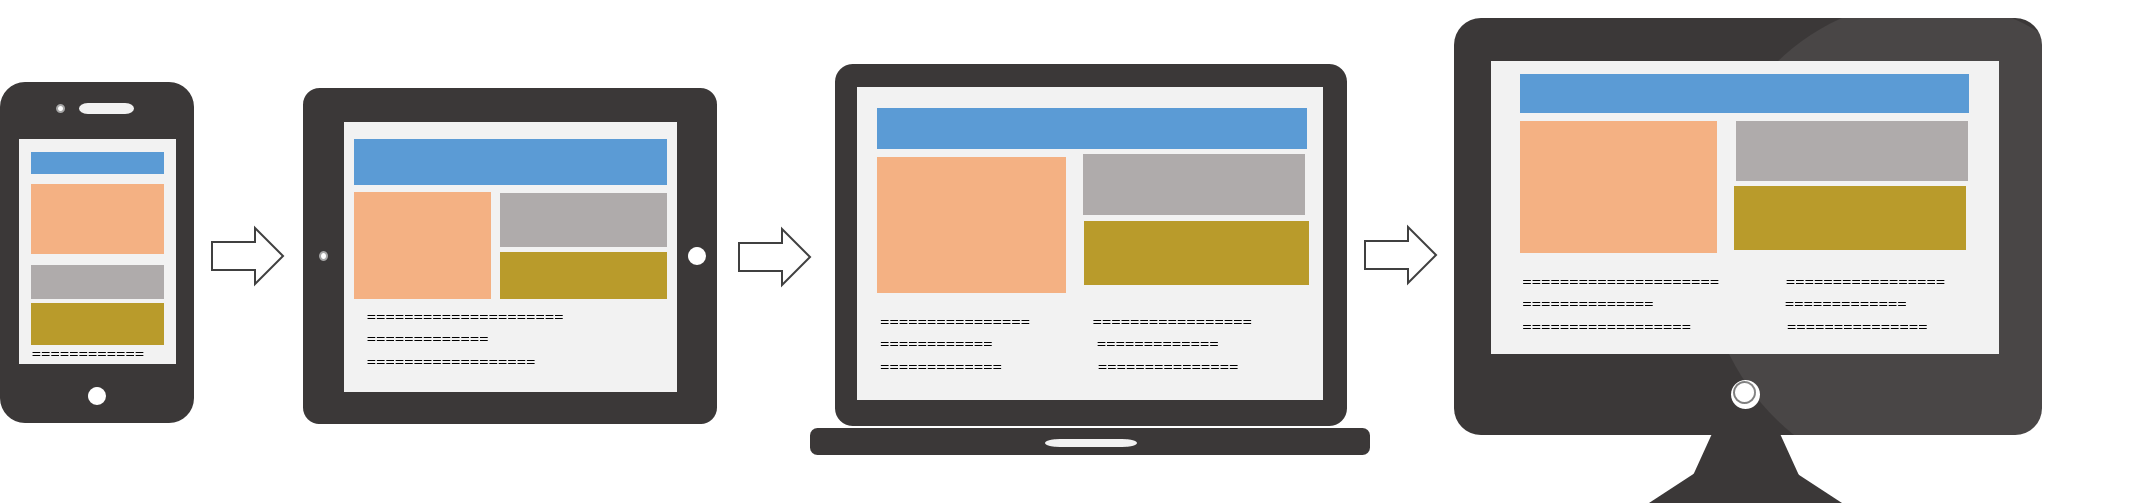 Wireframe of a site on different sized devices